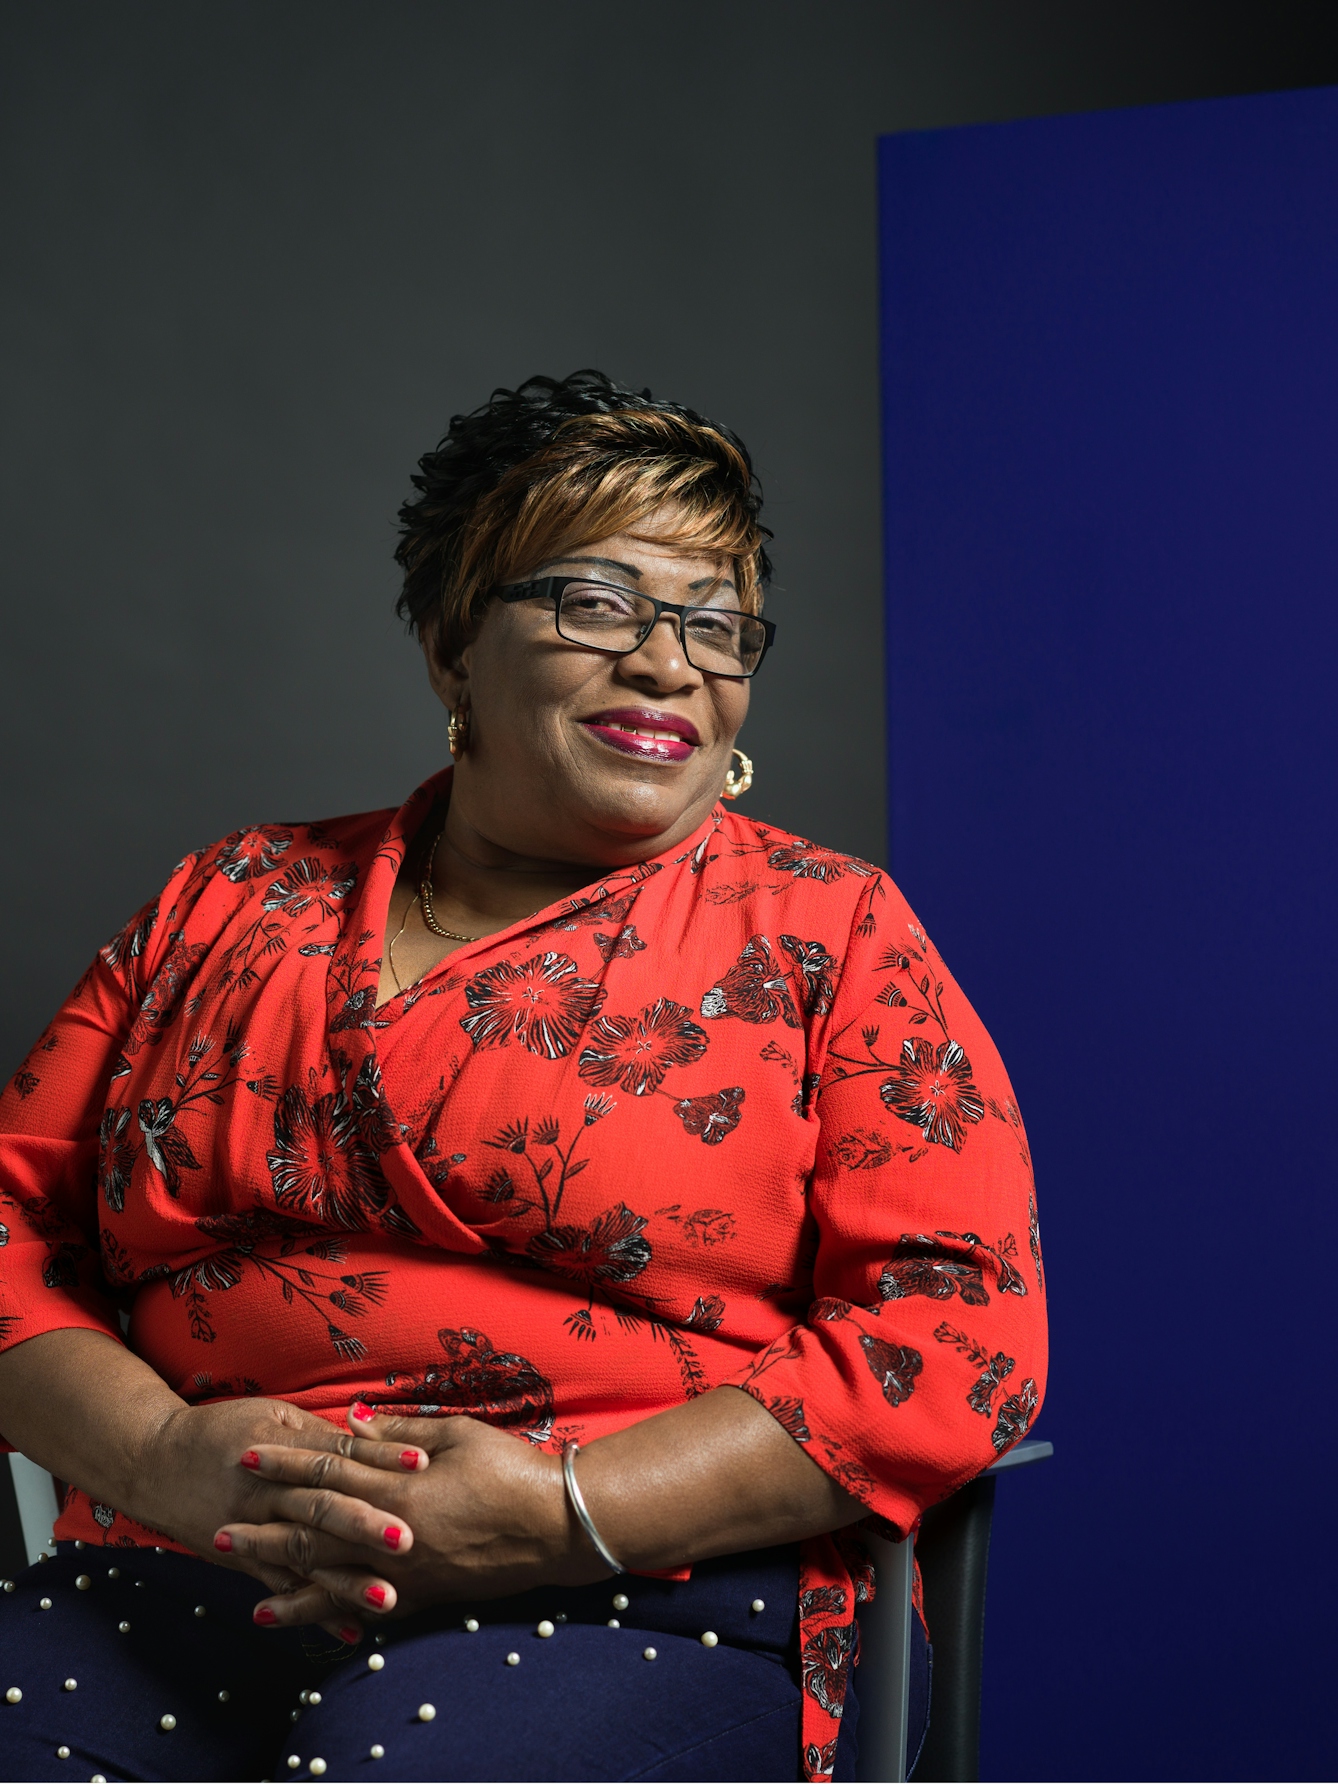 Colour photograph half-length portrait of Joyce Williams, a black woman sitting in a chair. Joyce is smiling and has short hair with a fringe, red lipstick and gold hoop earrings. She wears a floral red shirt, with matching red nail polish on her fingers, and blue trousers with white polka dots. 